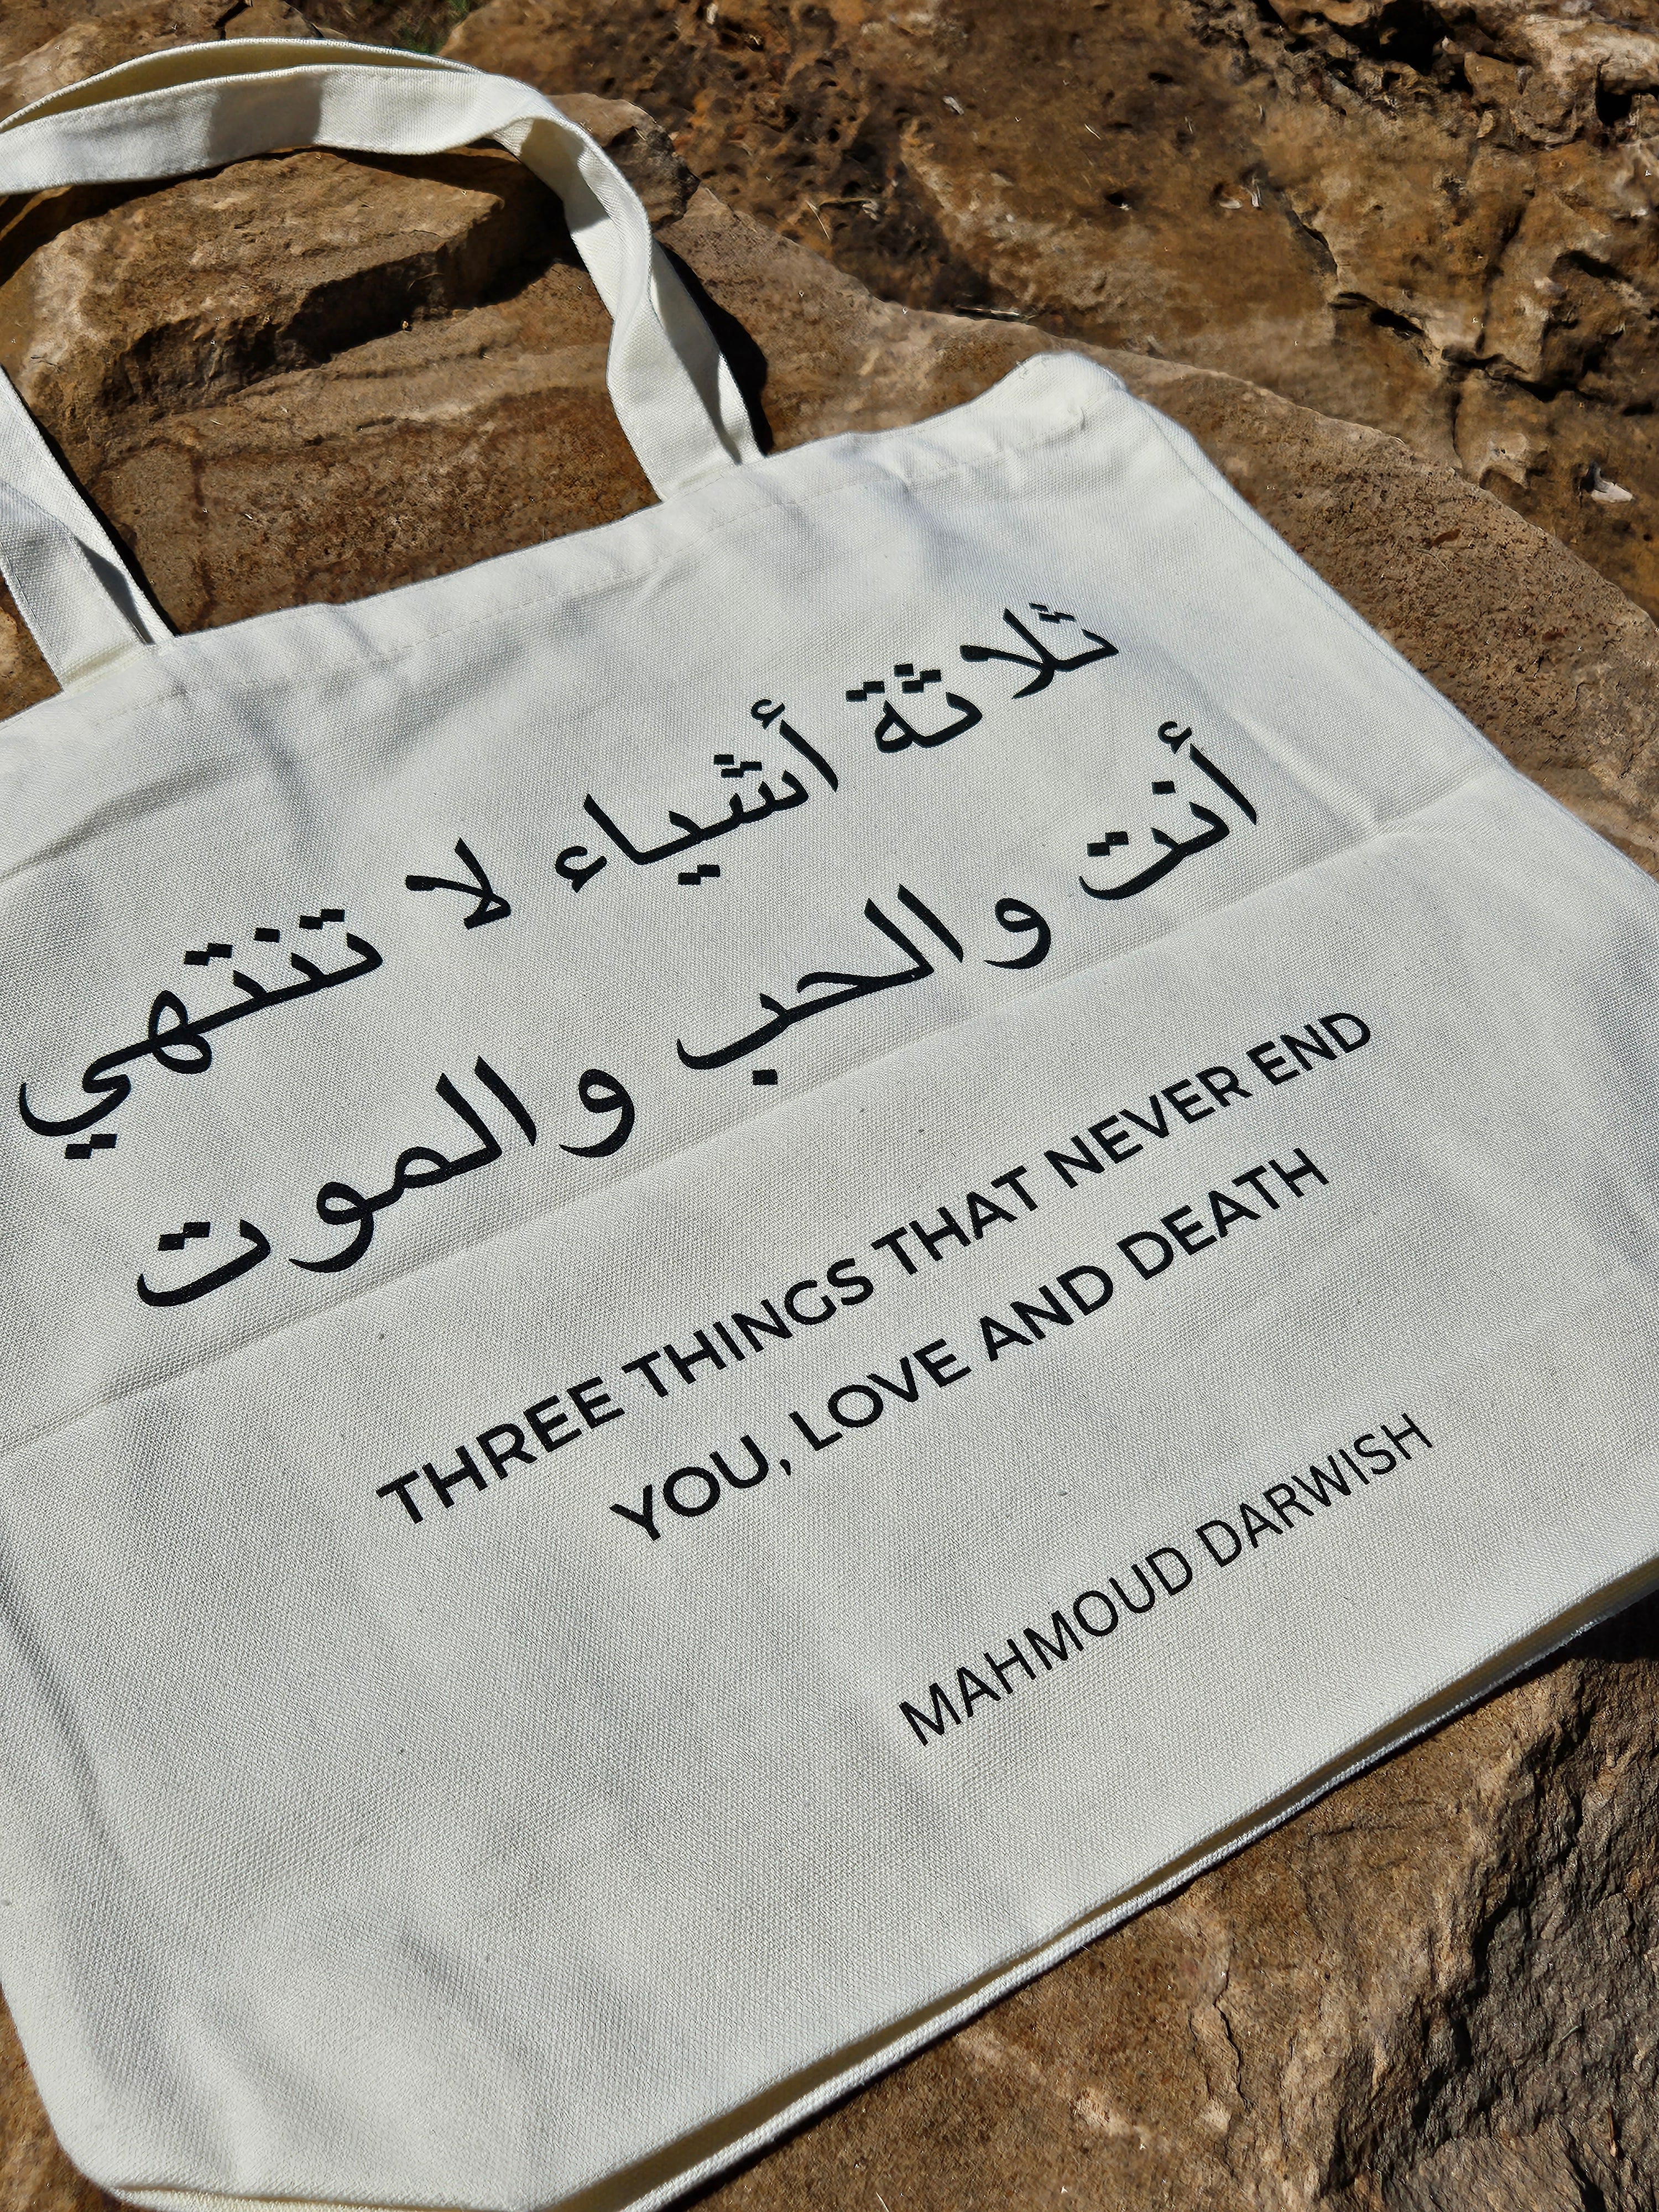 "Three Things That Never End, You, Love and Death" Canvas Tote Bag - Mahmoud Darwish - Habibi Heritage